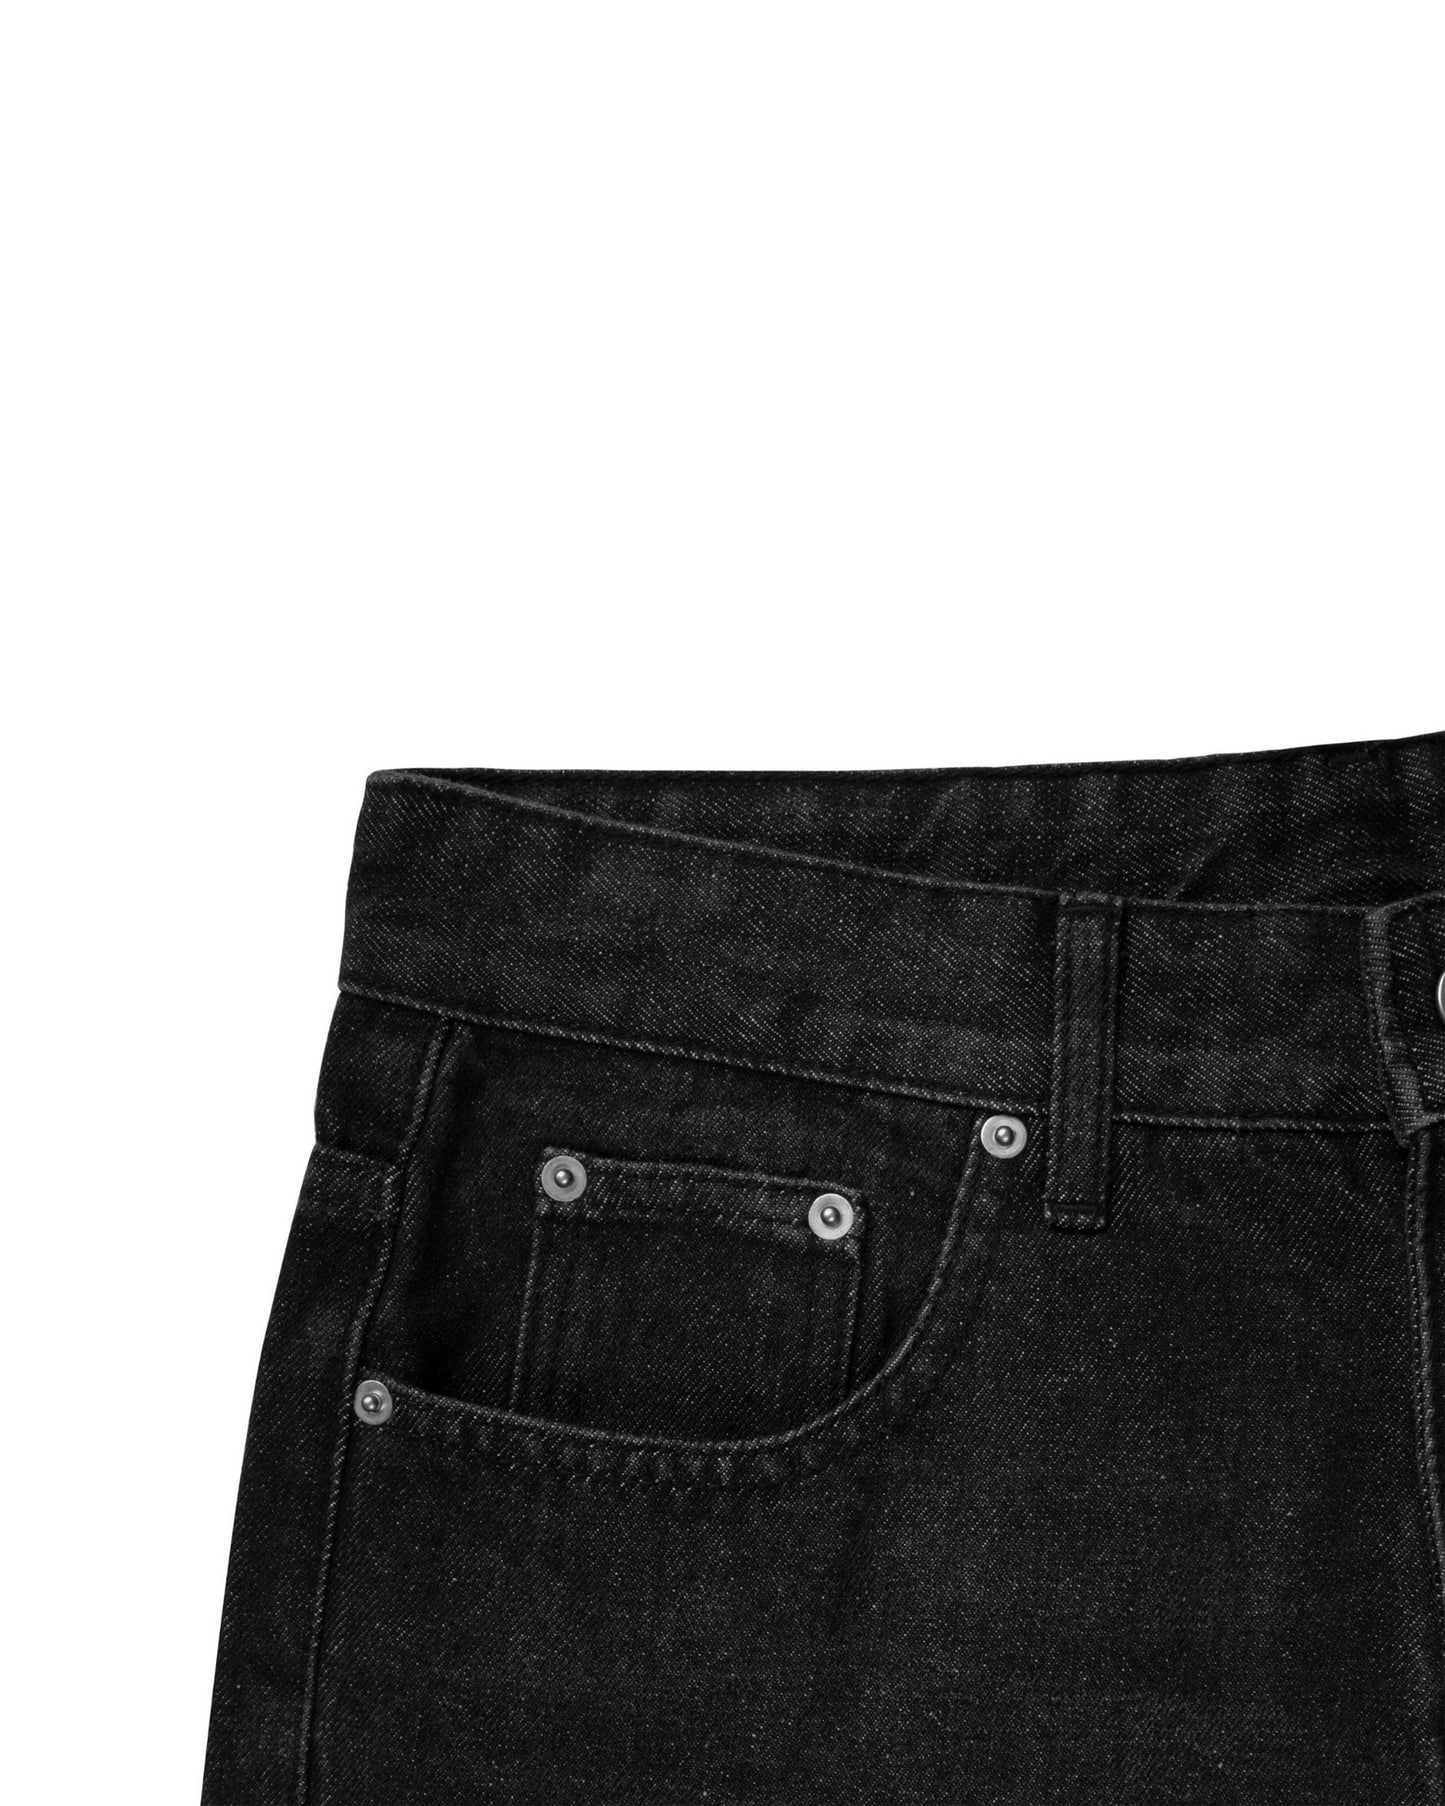 Levents® Classic Wash Straight Jeans/ Black